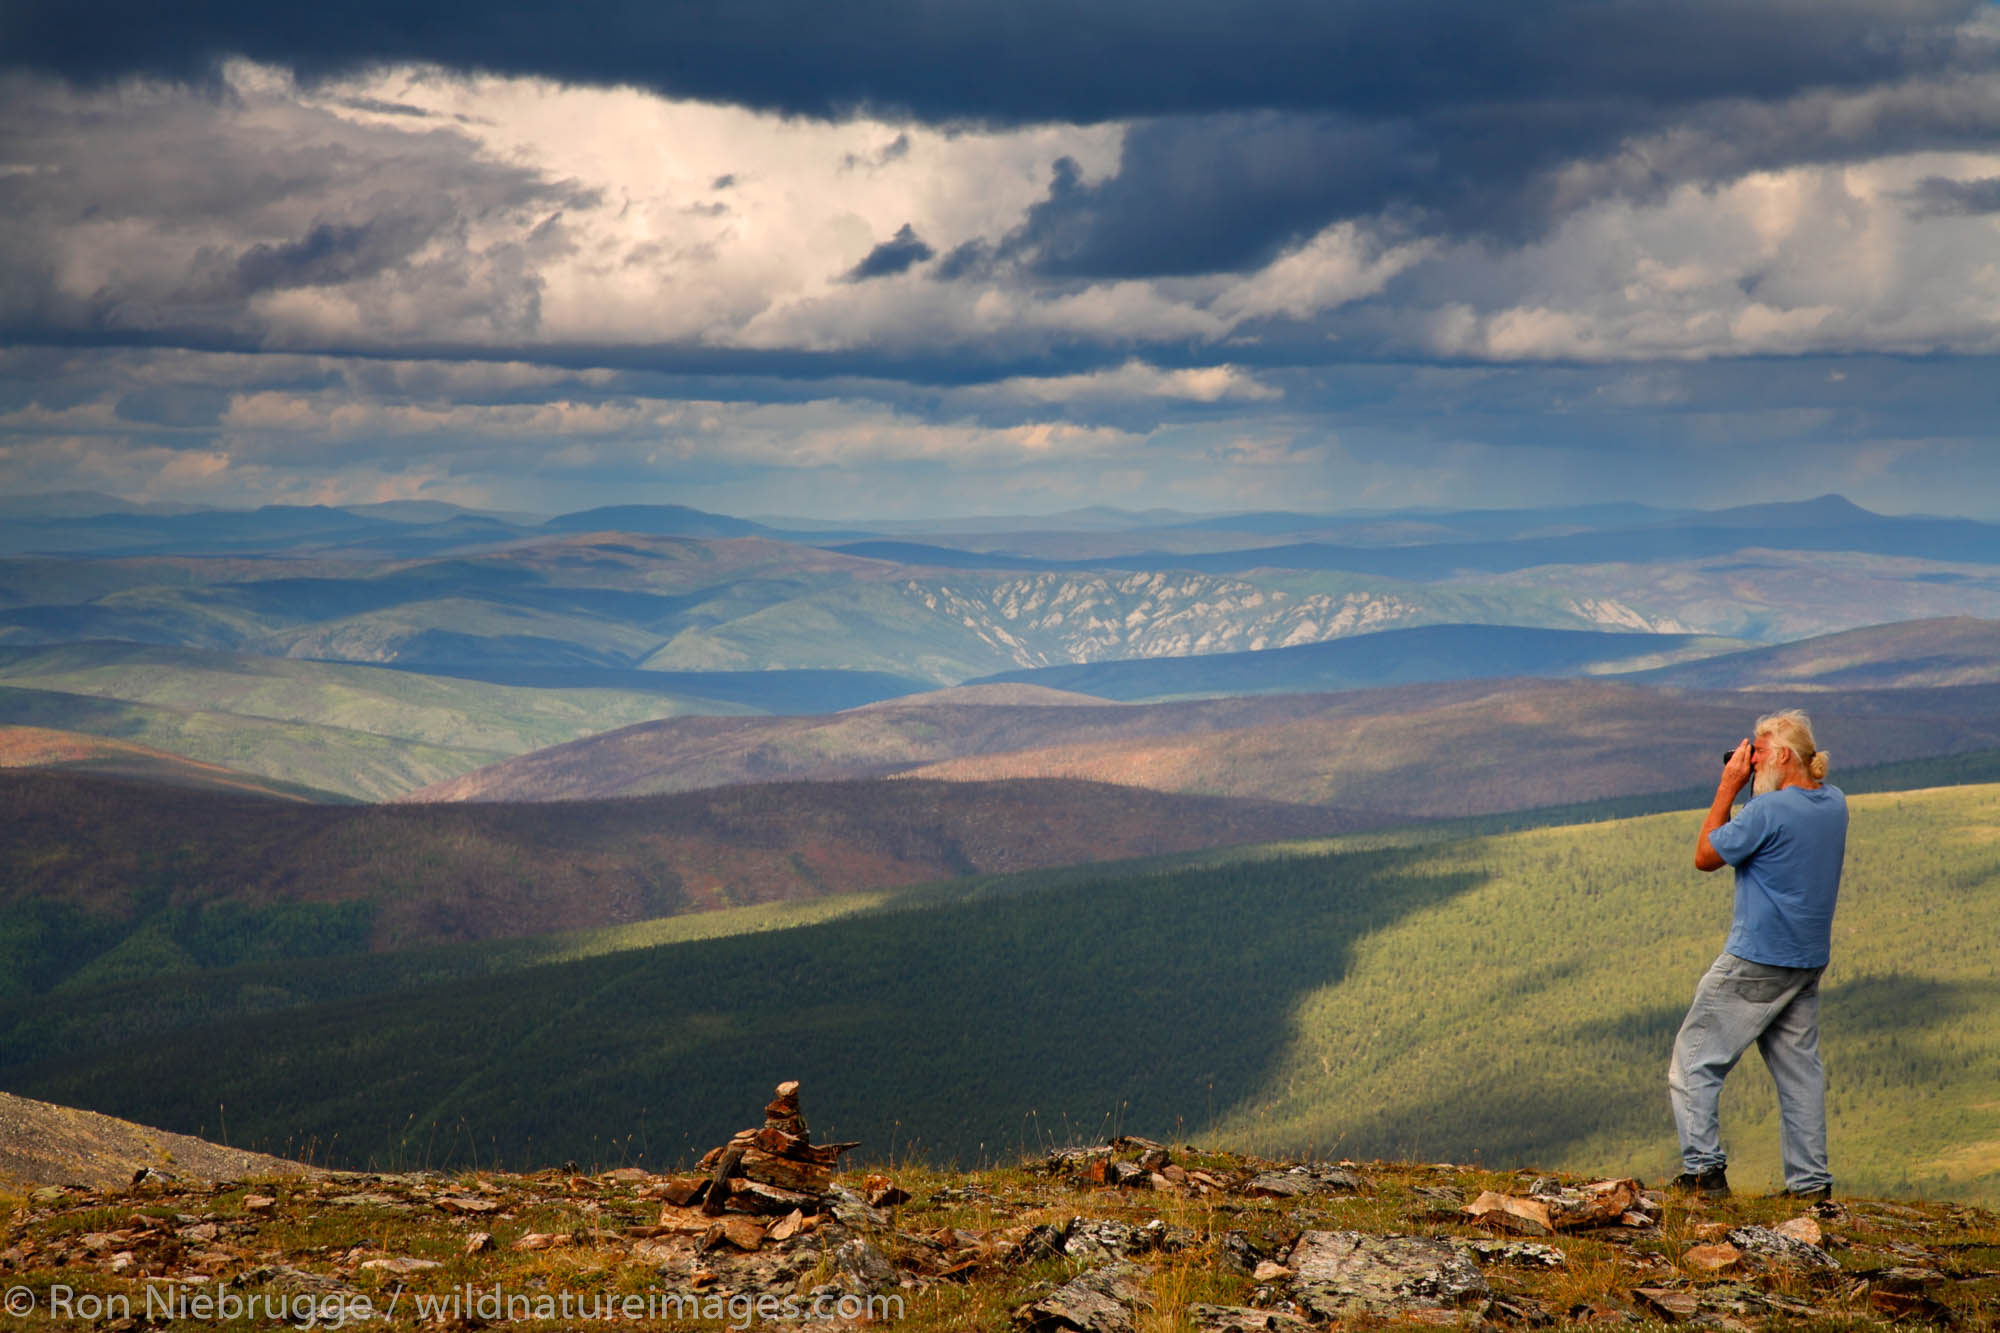 A visitor enjoys the view from along the Top of the World Highway, Yukon Territory, Canada.